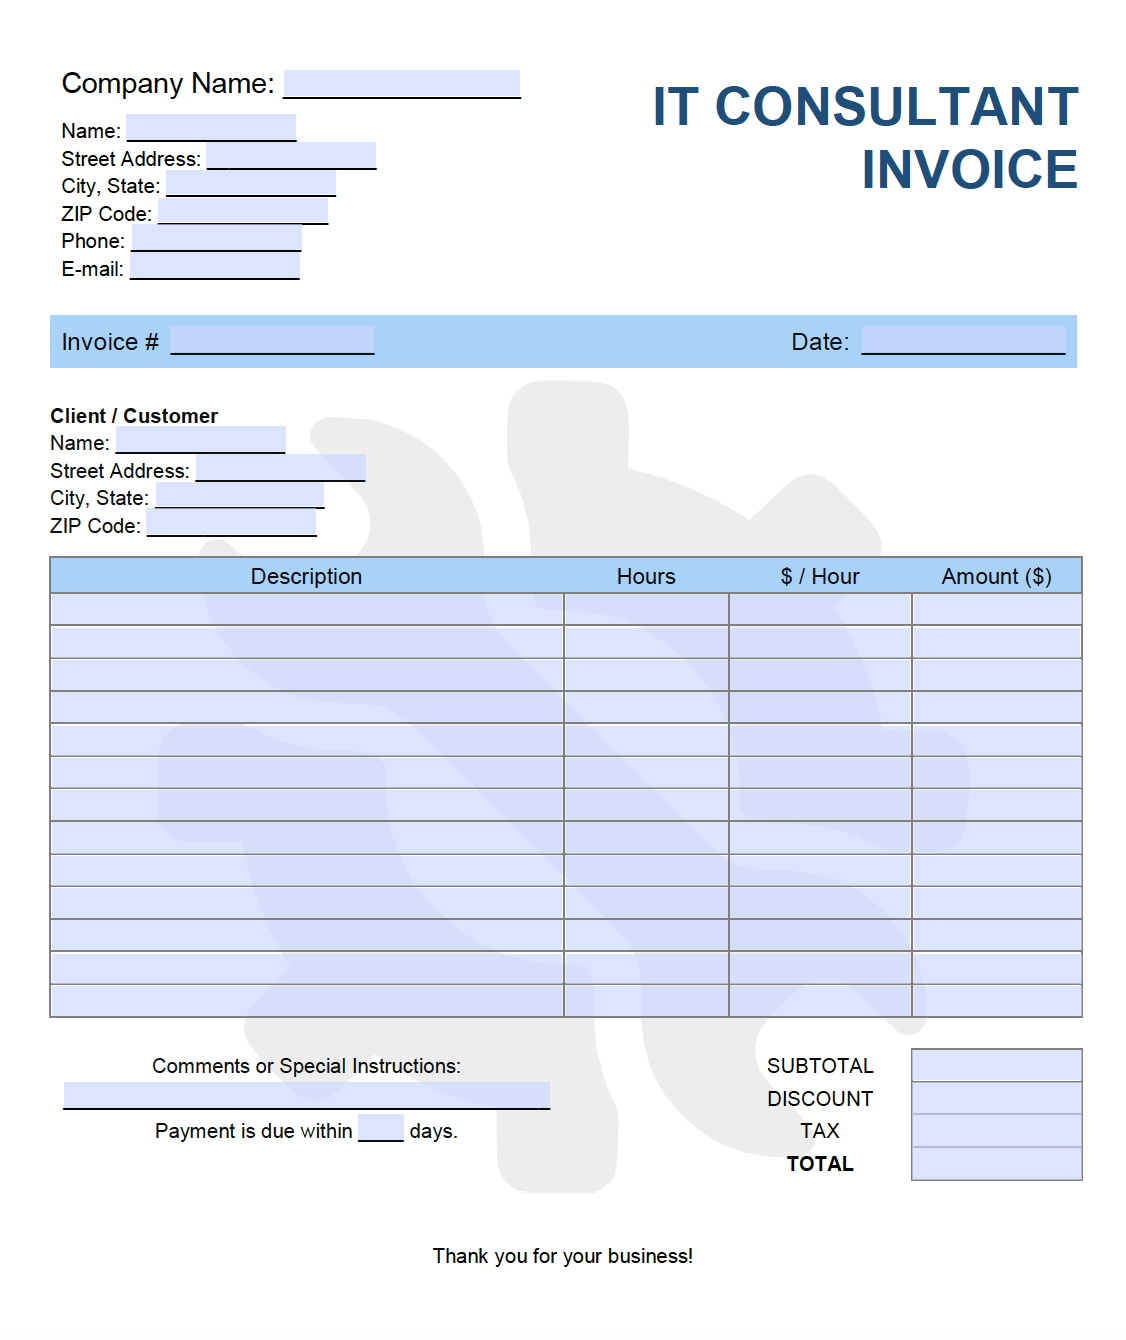 Free IT Consultant Invoice Template  PDF  WORD  EXCEL With Software Consulting Invoice Template